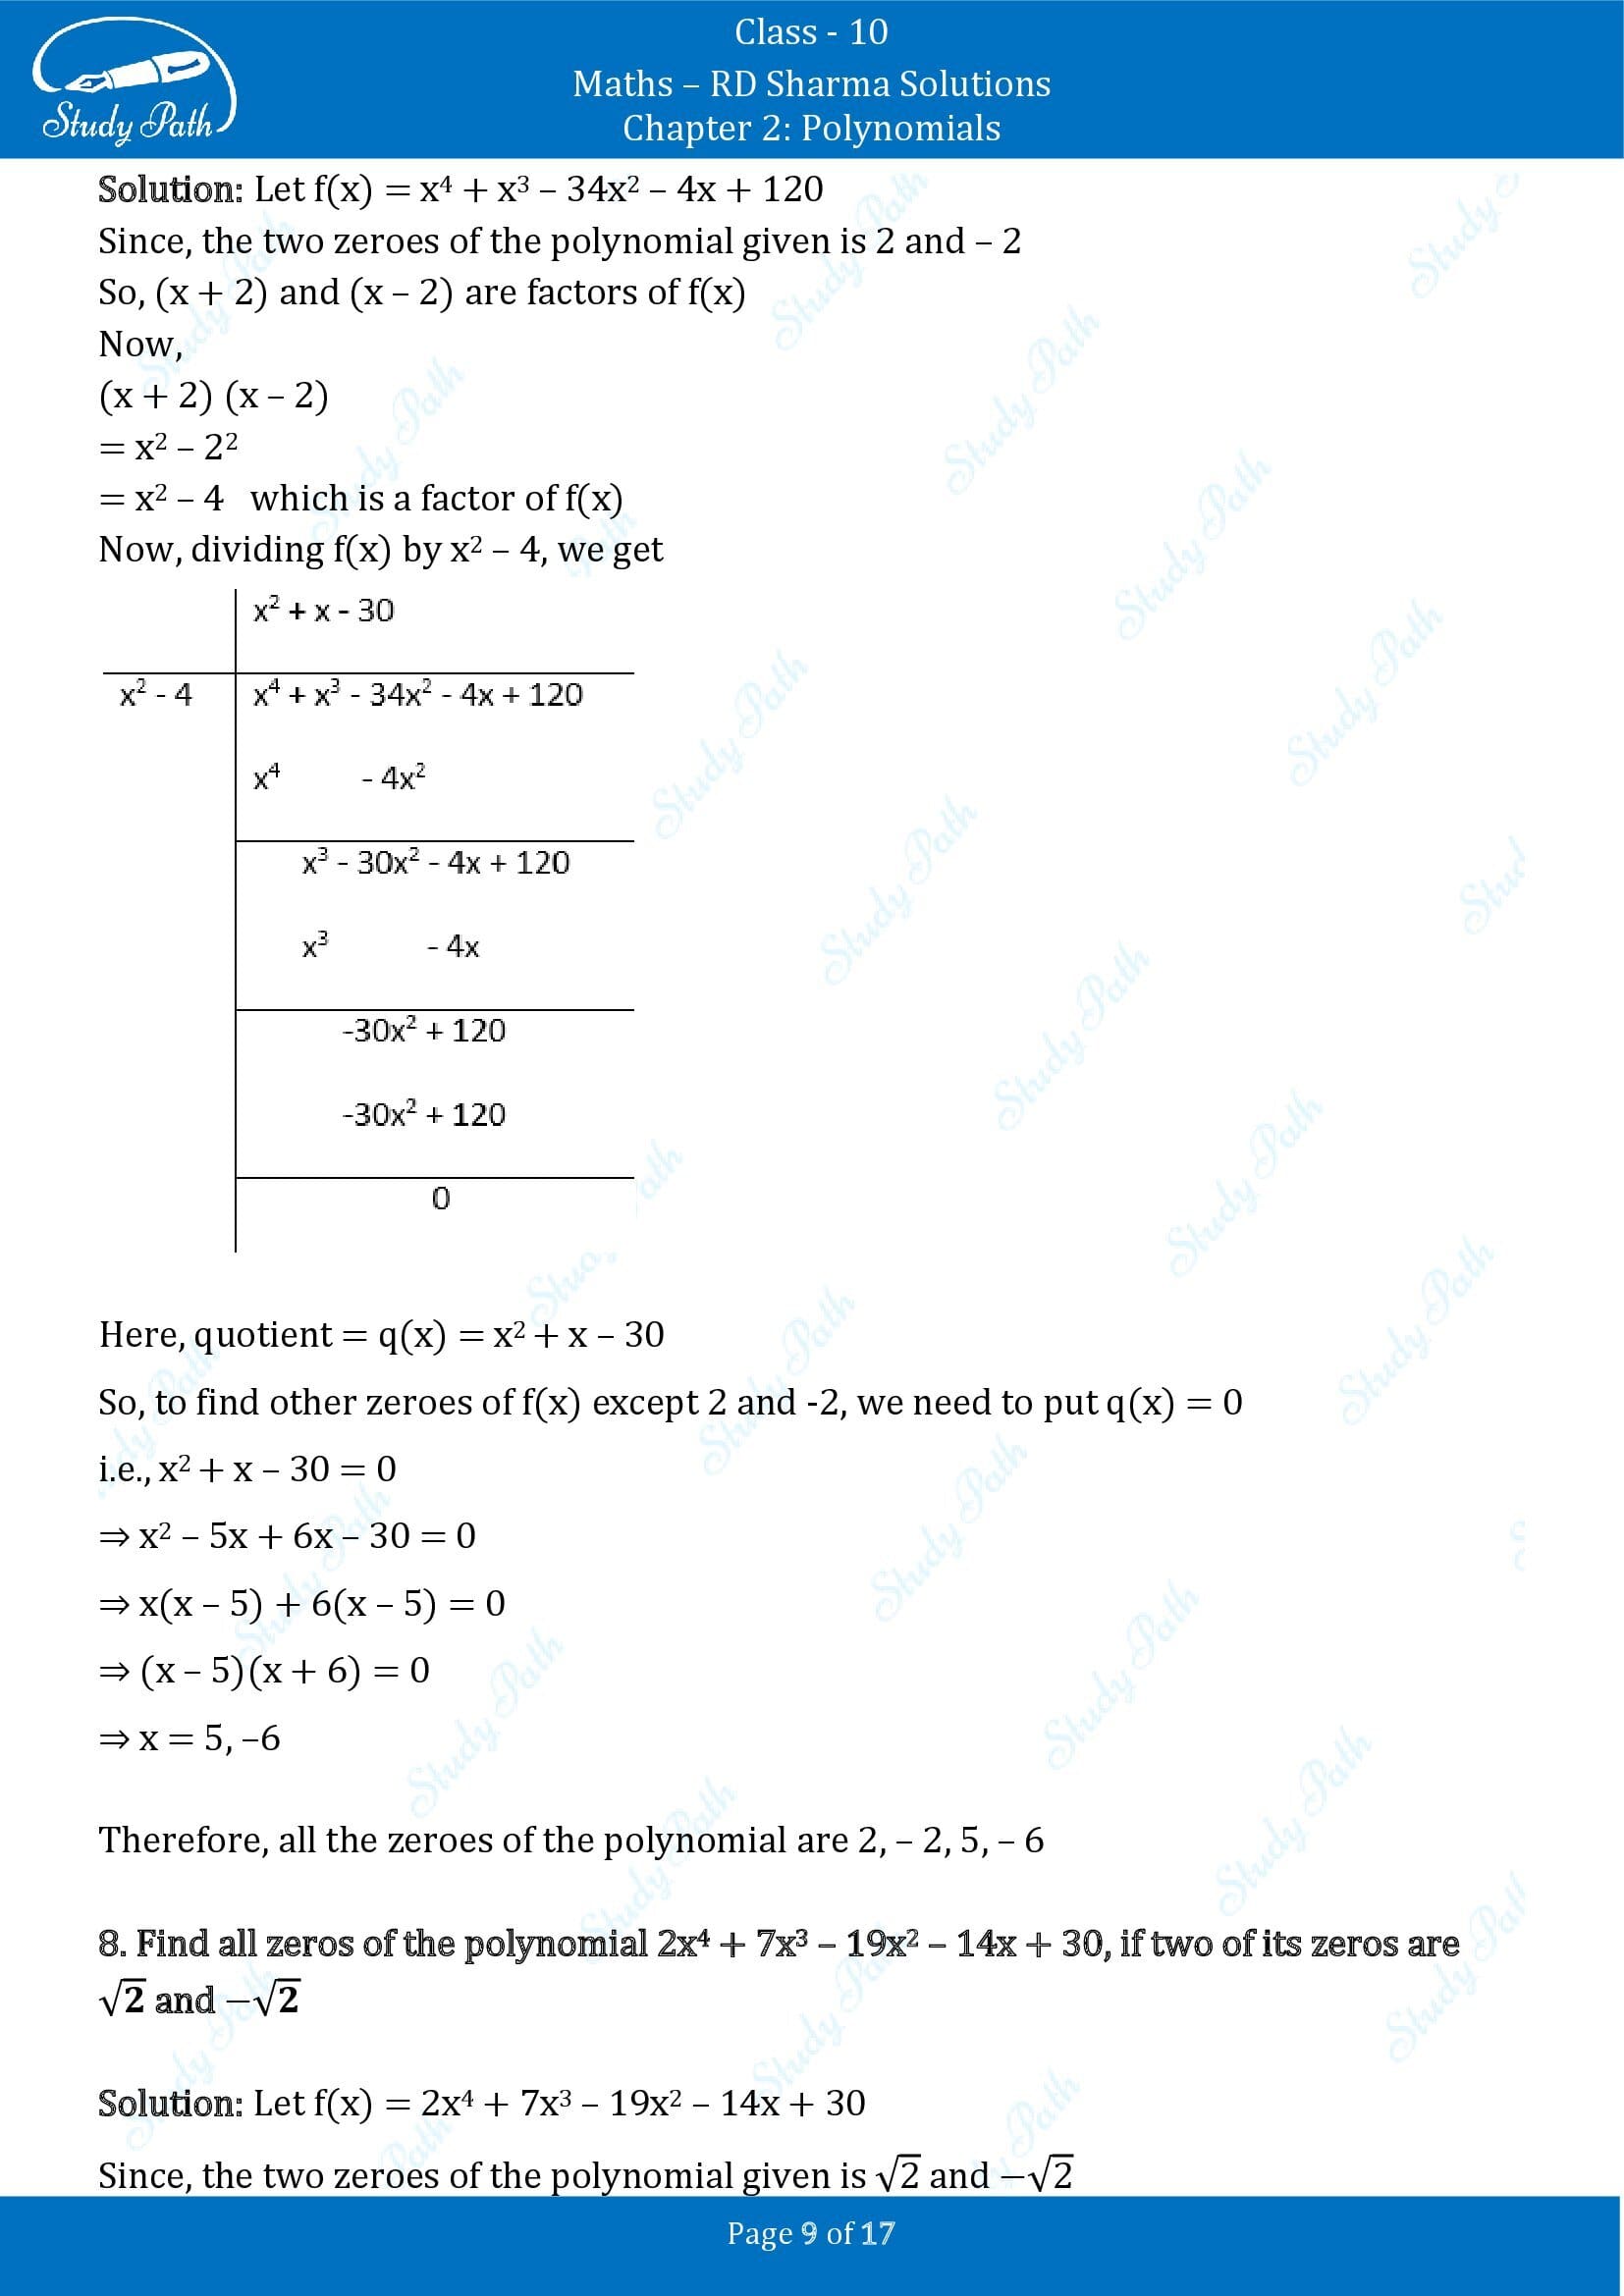 RD Sharma Solutions Class 10 Chapter 2 Polynomials Exercise 2.3 00009